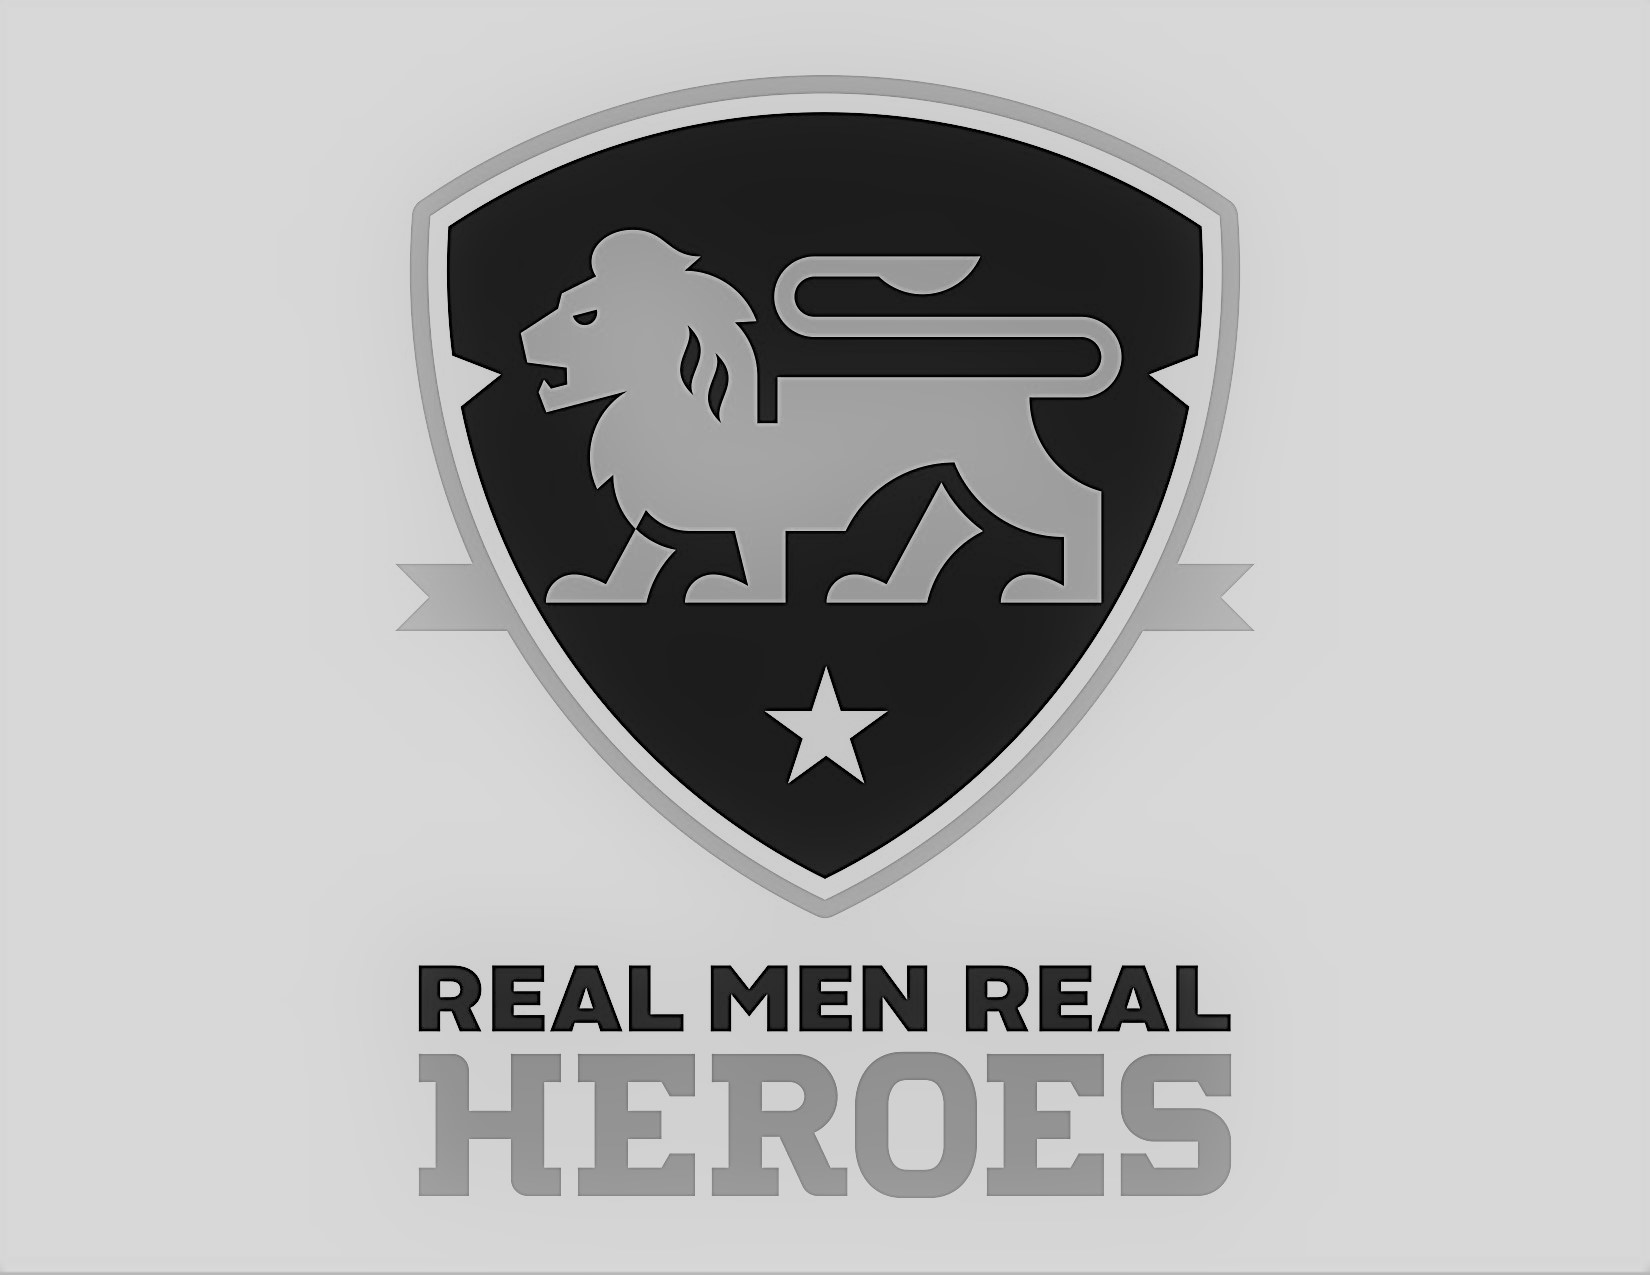 Real Men Real Heroes Gives Kids Successful Communi